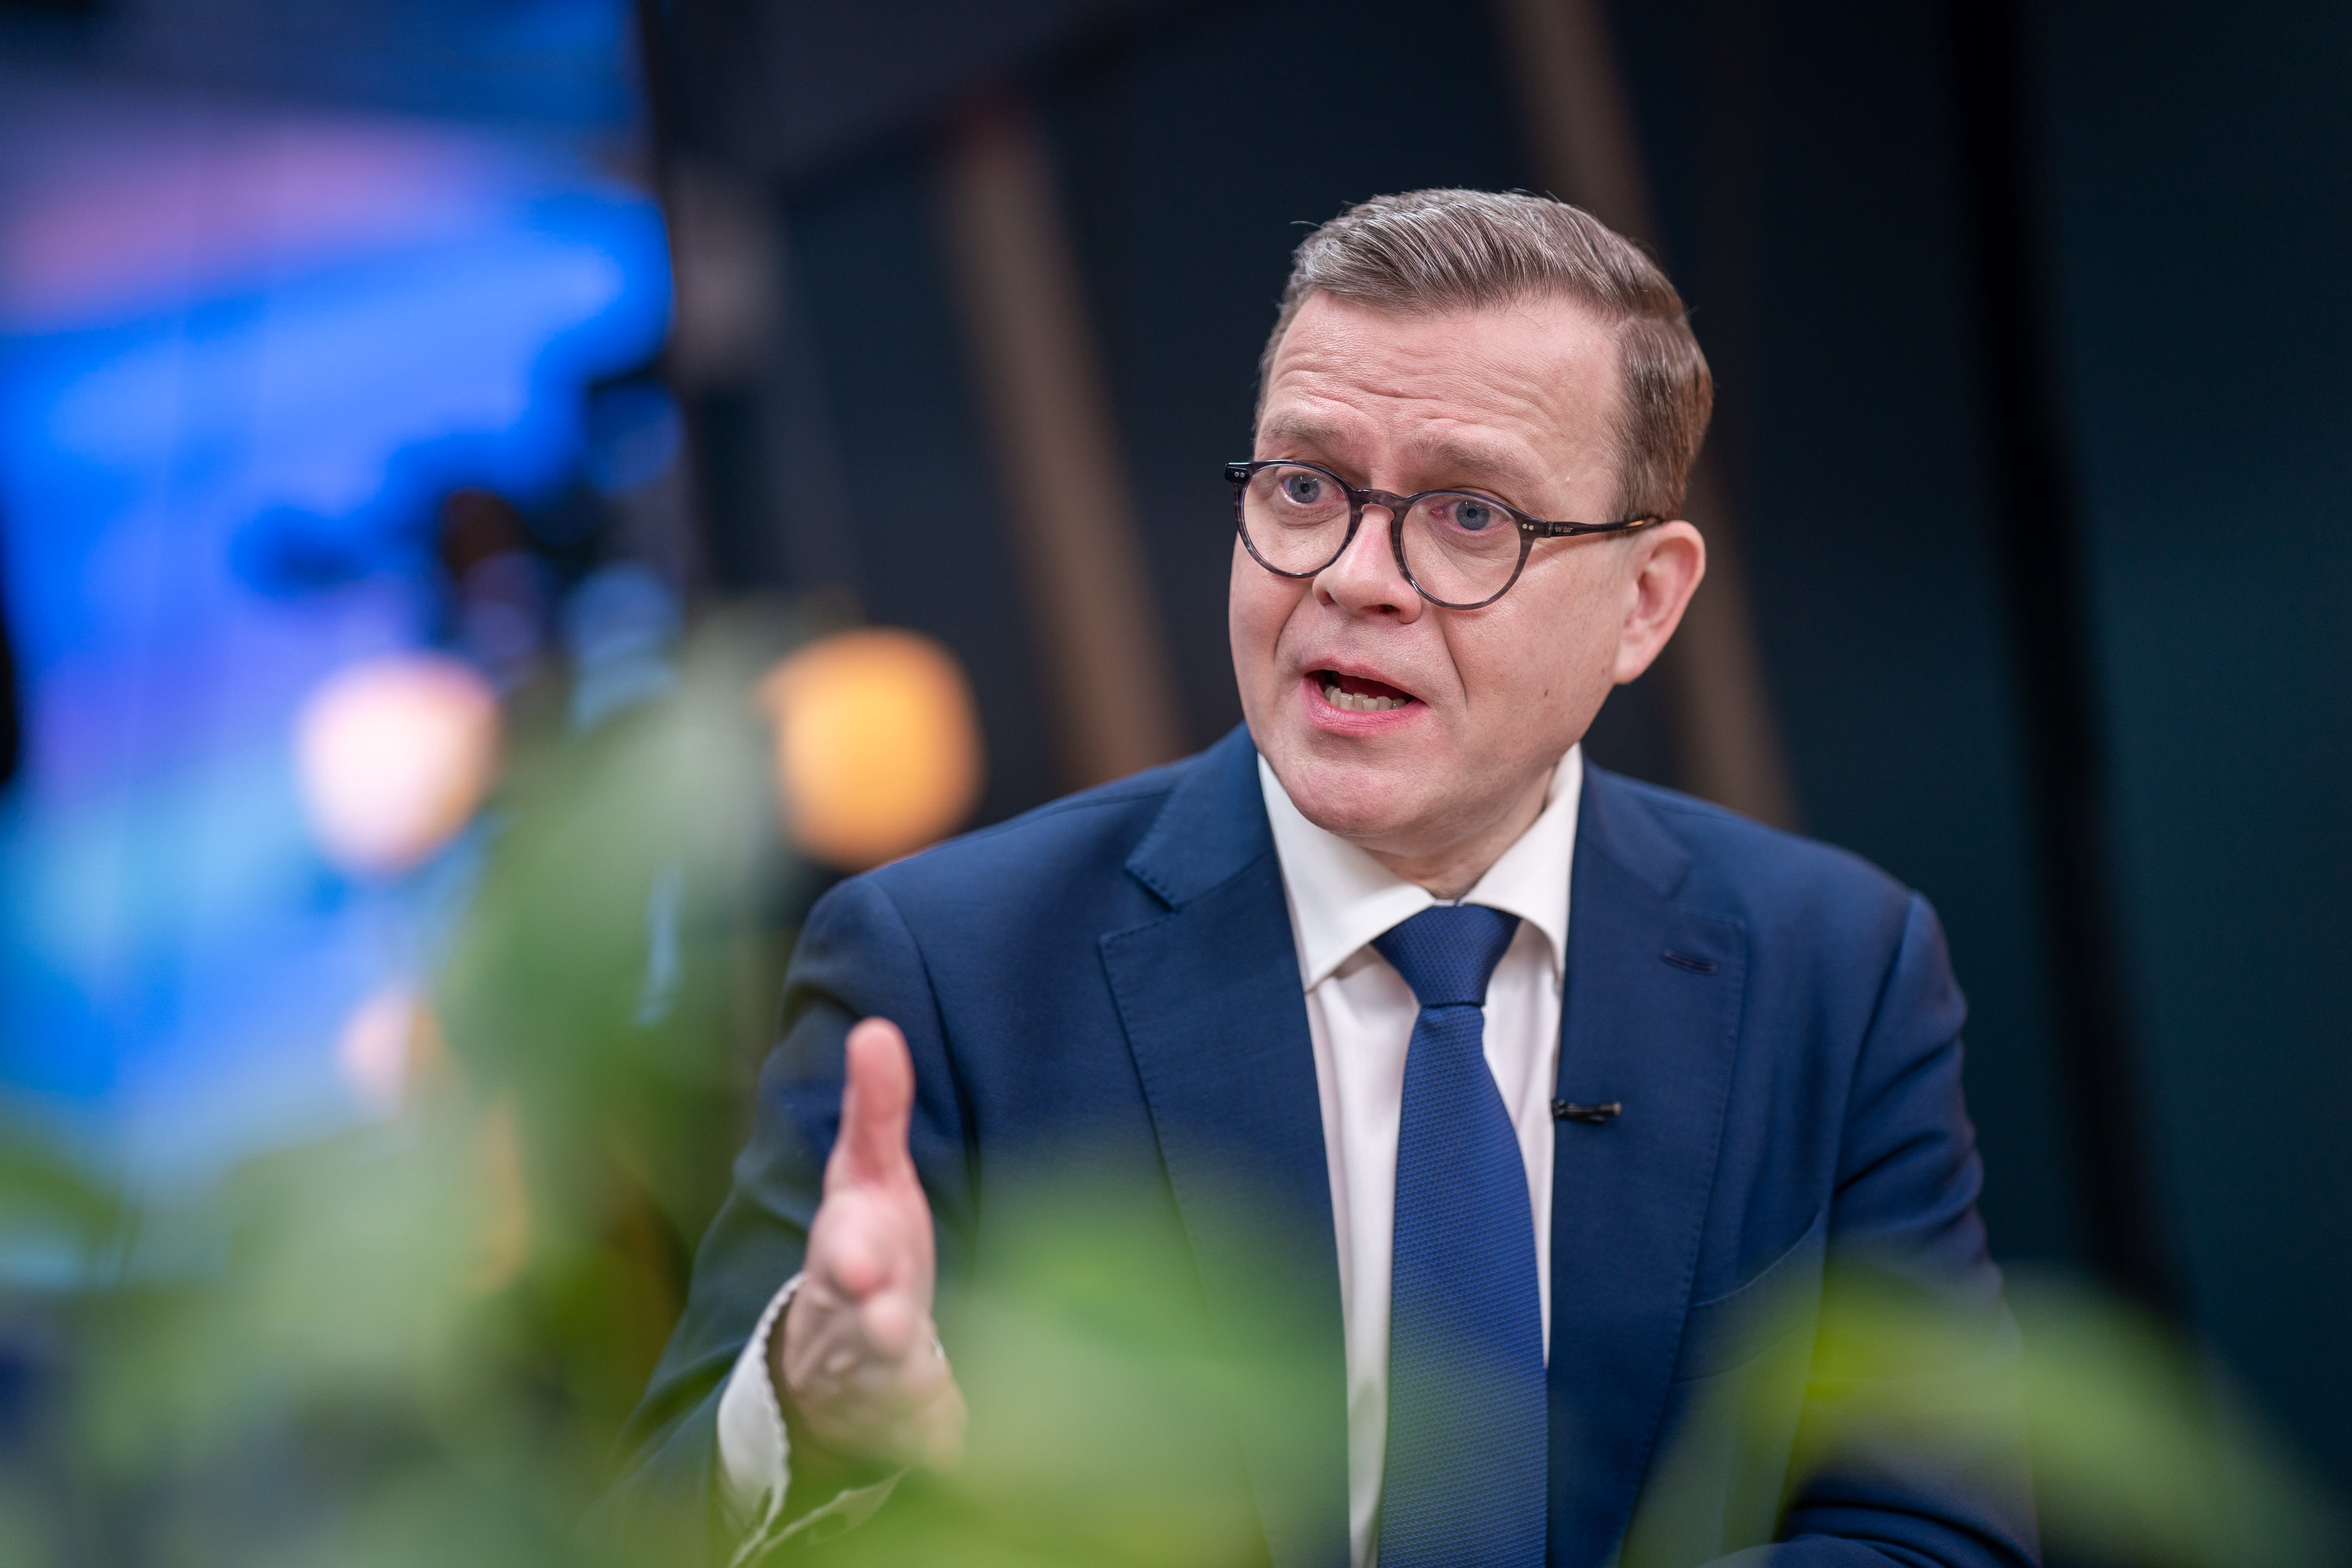 Orpo: Strikes too much and out of proportion